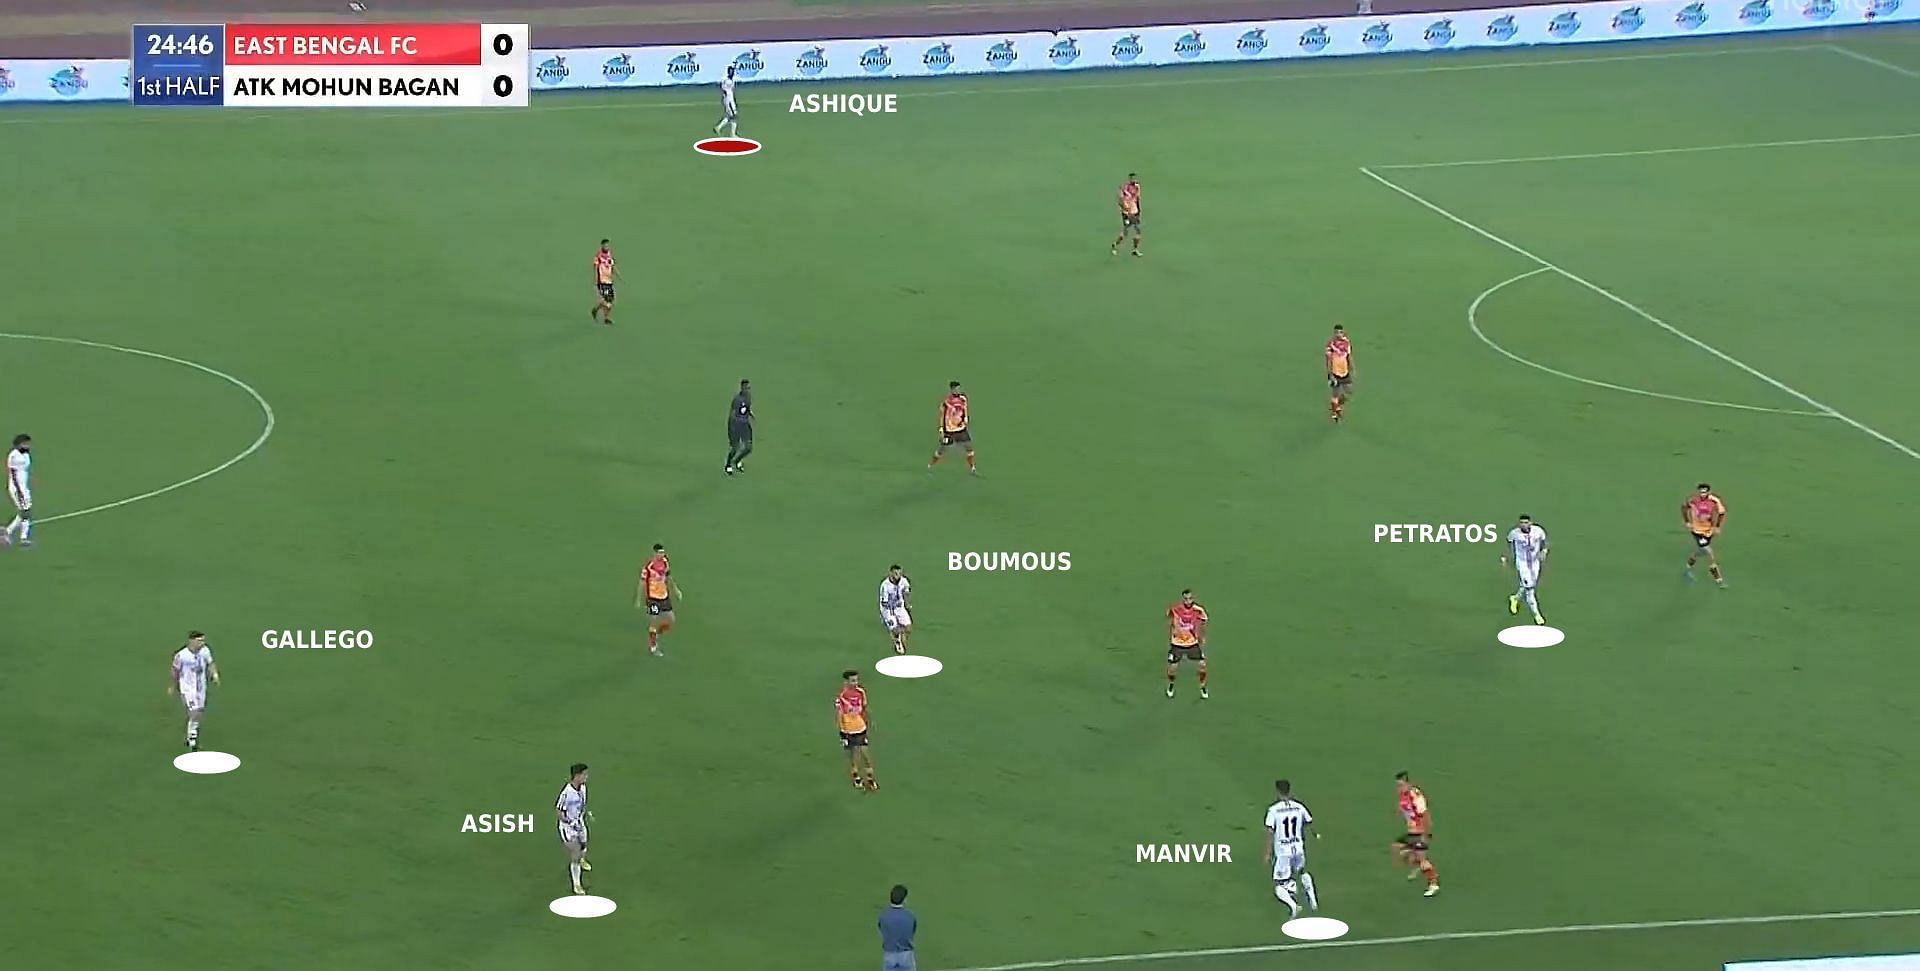 ATK Mohun Bagan have five players including Petratos, who drifts towards the ball. This drags East Bengal players towards the ball and Ashique Kuruniyan is isolated on the far side and in a one-versus-one situation against the full-back (Image Credits: Hotstar)